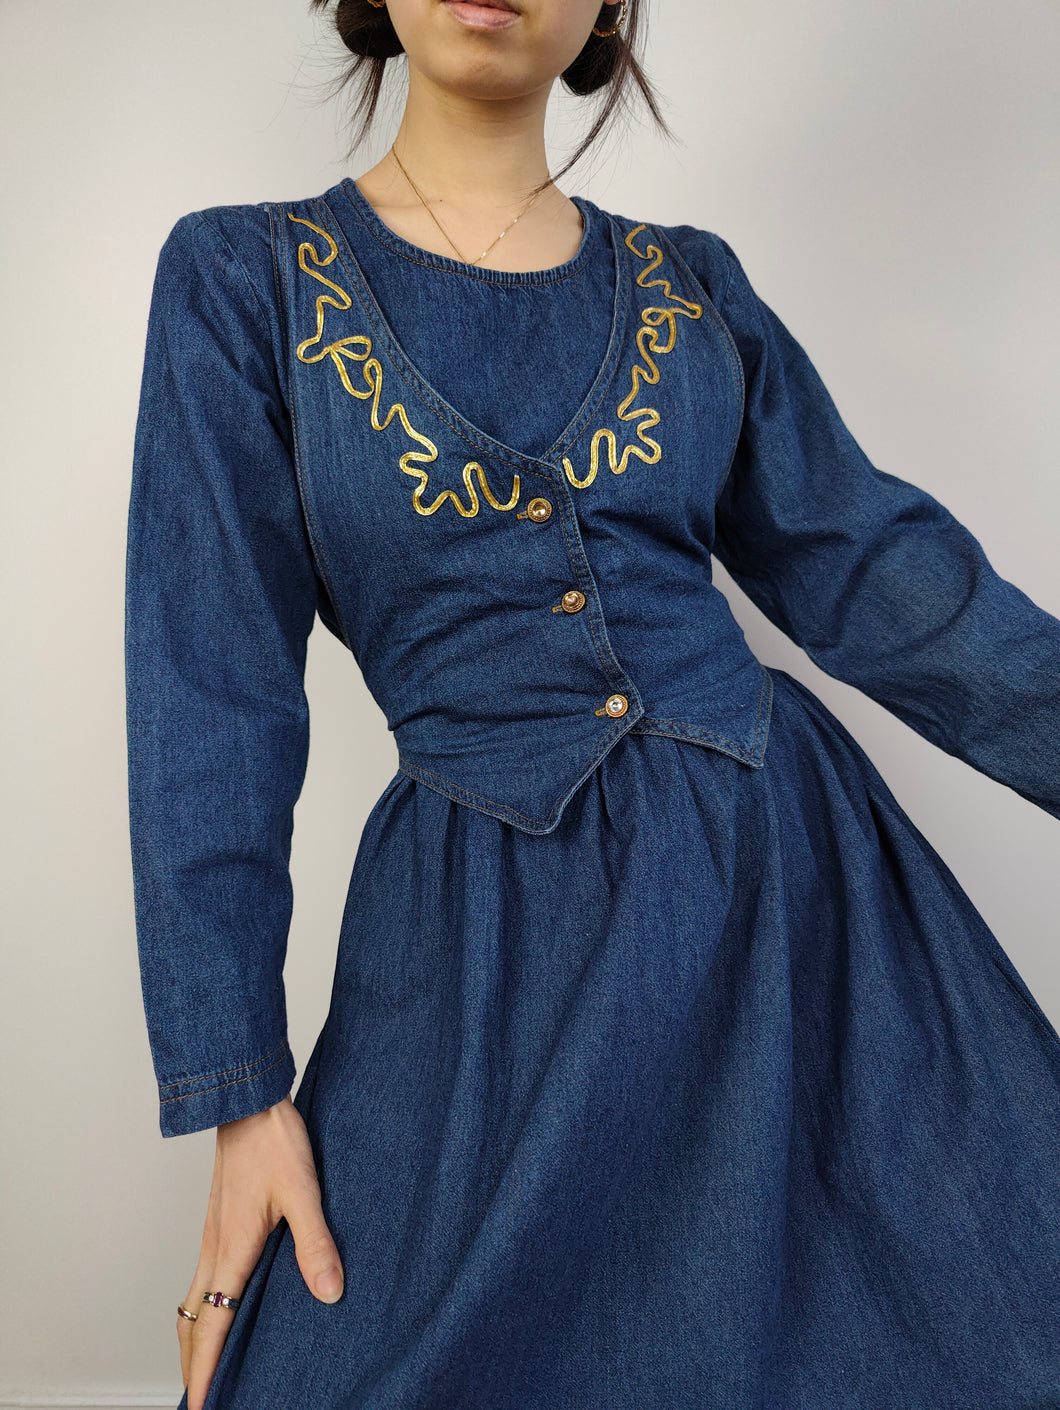 The Embroidery Waistcoat Blue Denim Dress | Vintage 90s dark blue jeans vest corset gold embroidered cottage core prairie spring summer long sleeve maxi long dress S